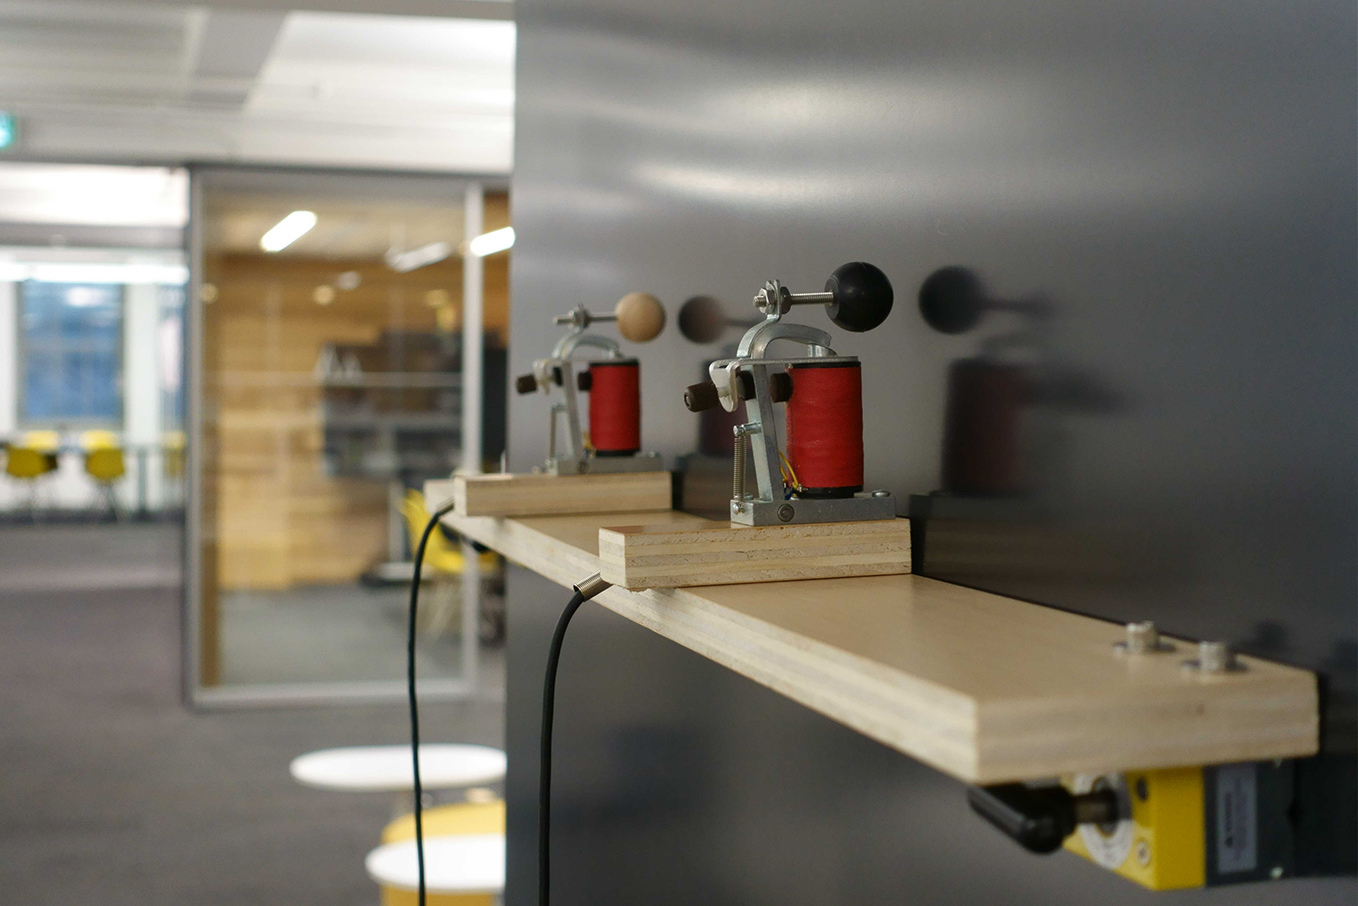 Two power-generated morse code tapping machines made by George Rahl.